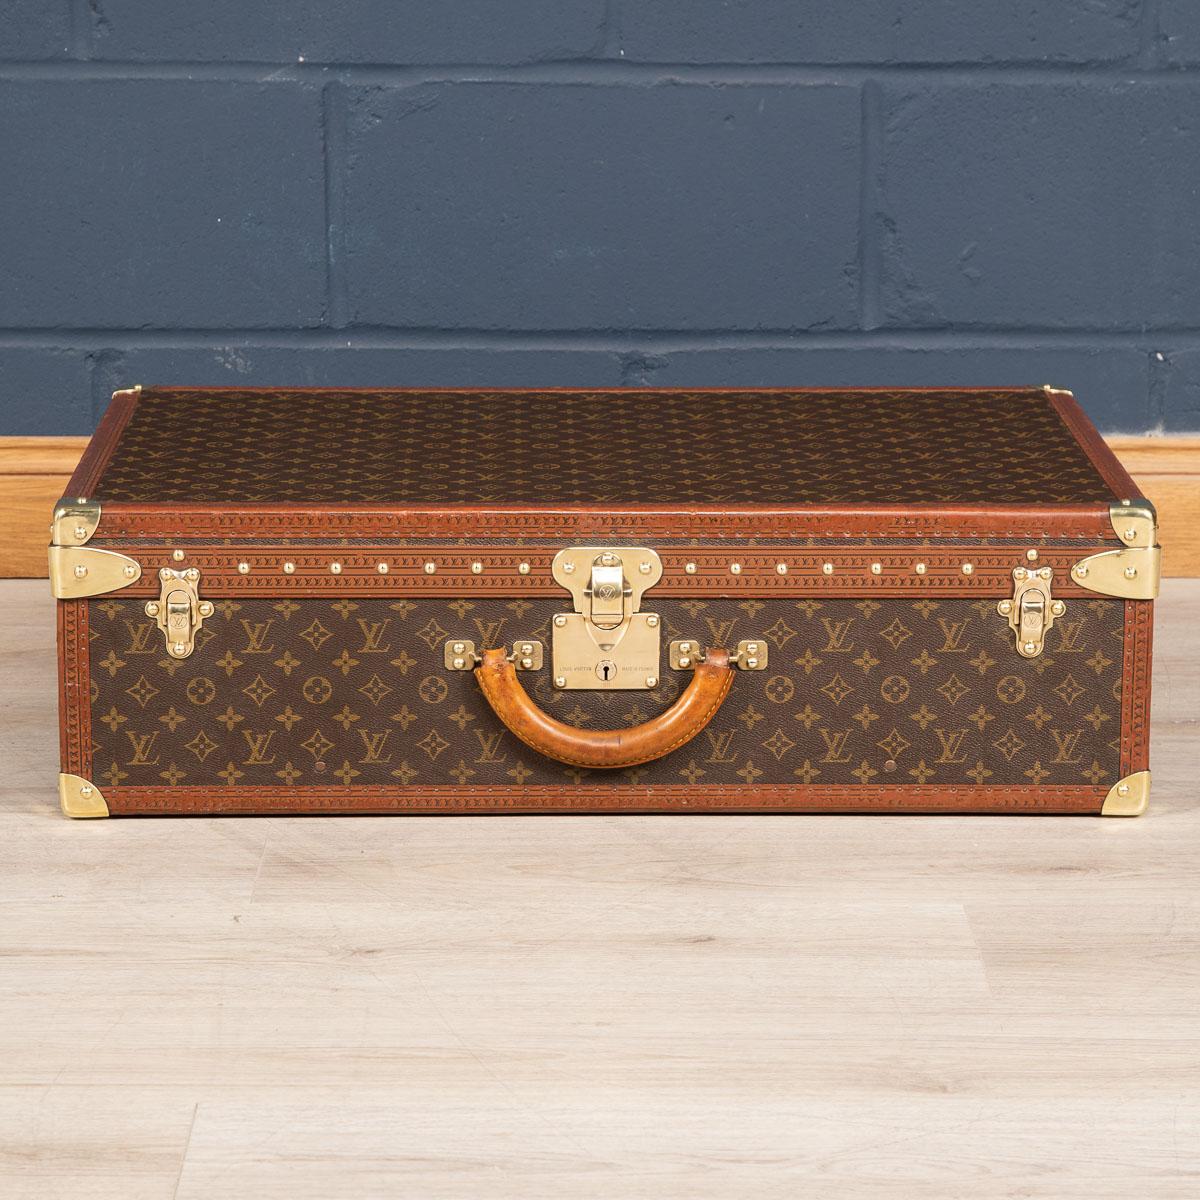 A charming Louis Vuitton hard-sided case, second half of the 20th century, the exterior finished in the famous monogram canvas with brass fittings. A great piece for use today or as an item for the home.

Please note that our interior pieces are